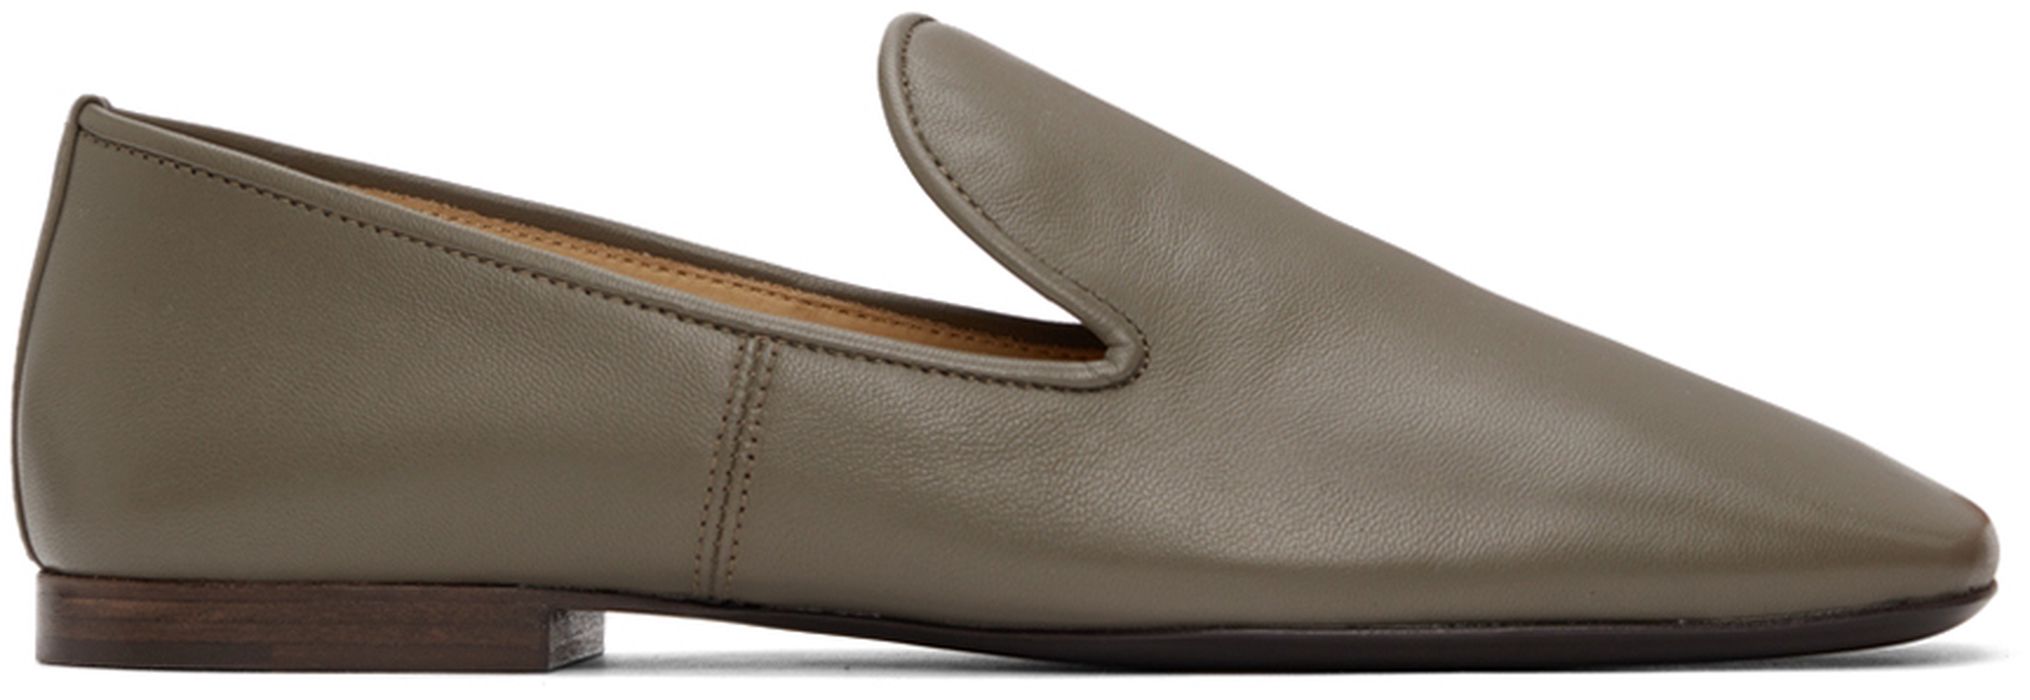 Lemaire Taupe Leather Soft Loafers